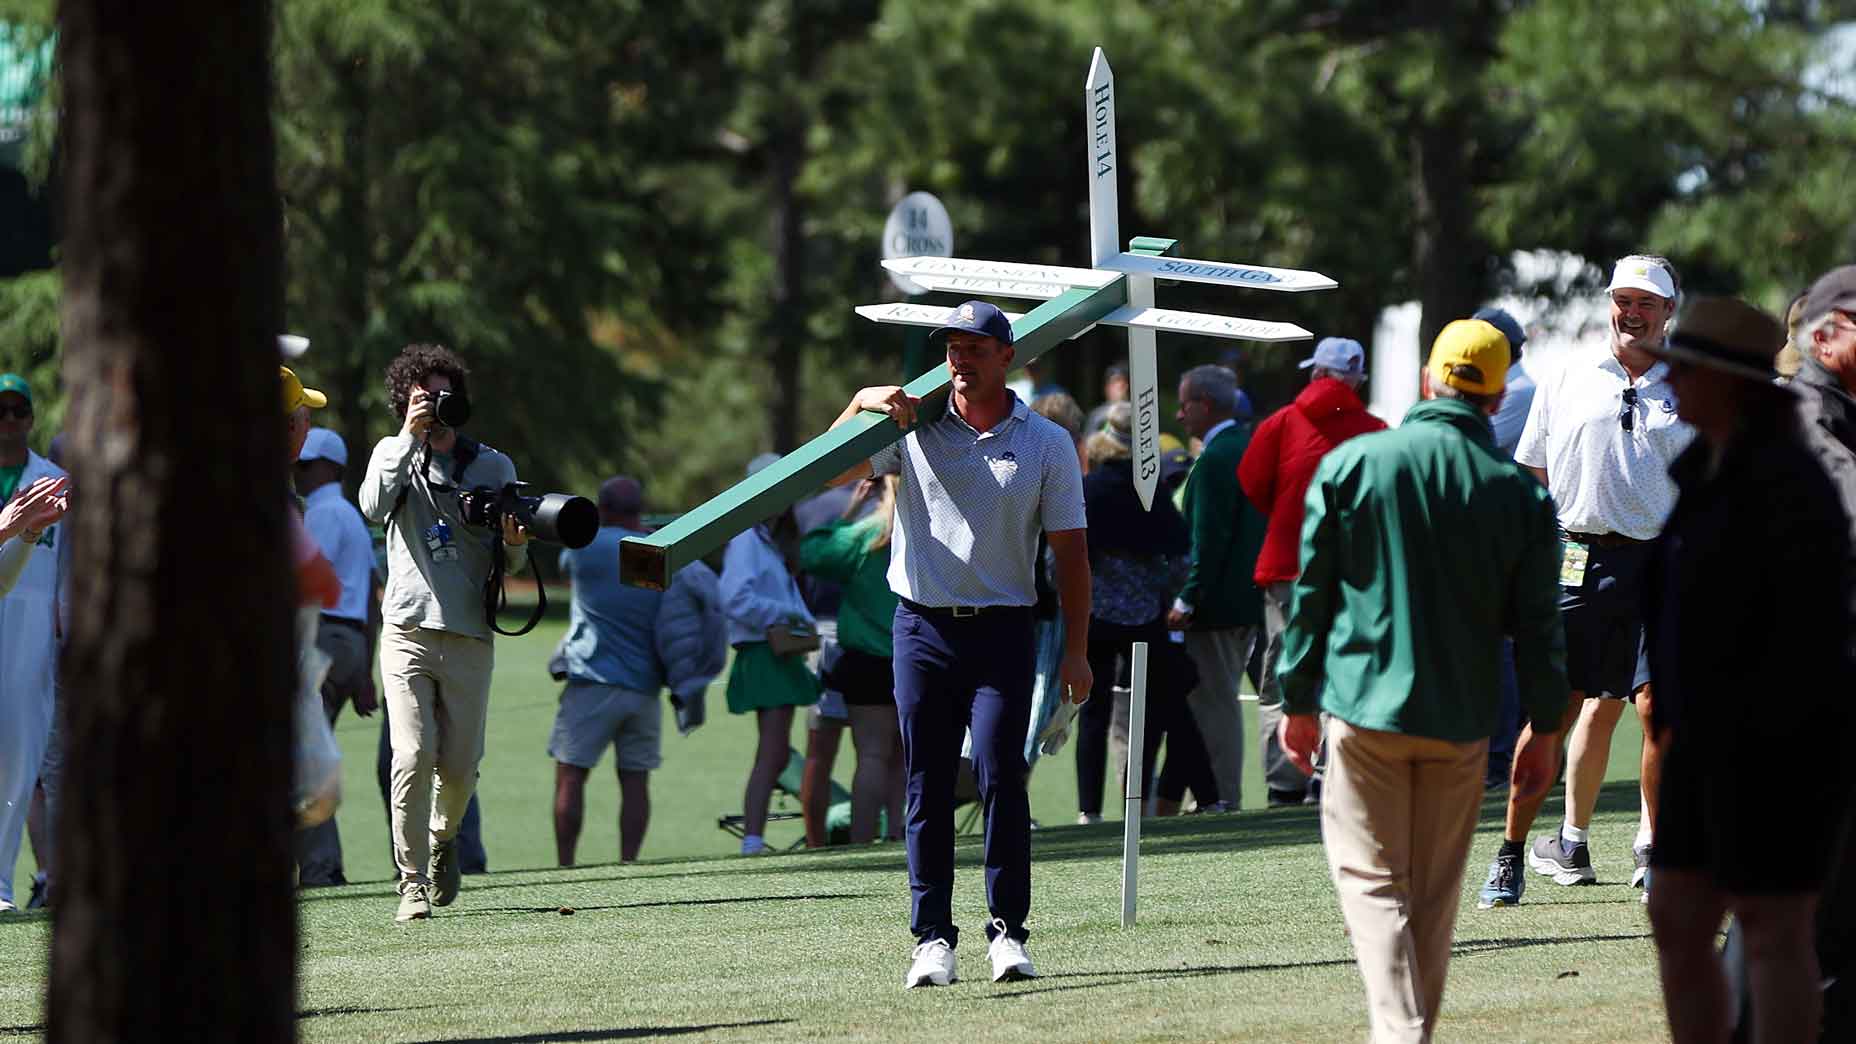 Bryson DeChambeau on the 13th hole of the Masters on Friday